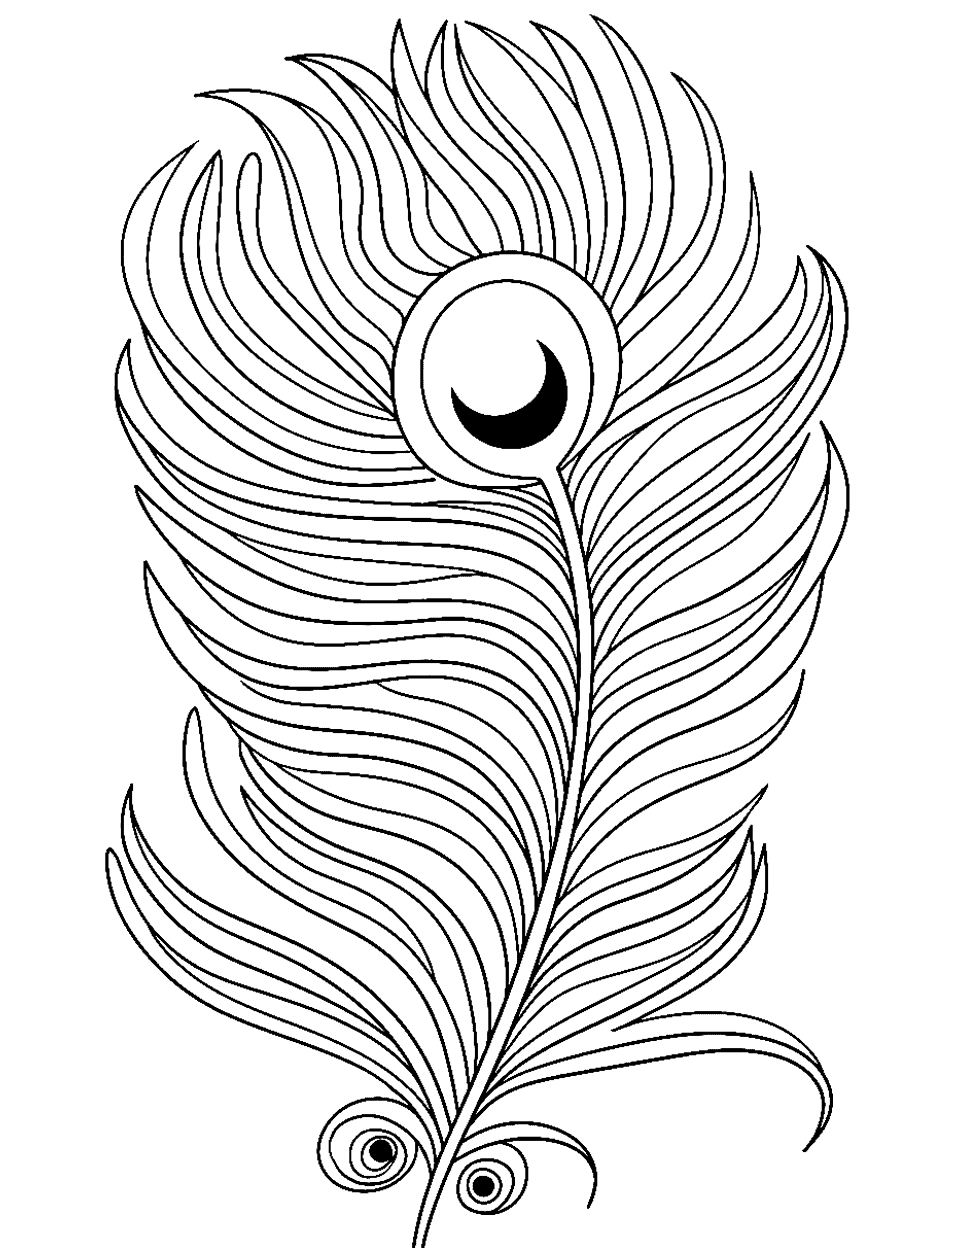 Peacock's Feathered Fan Coloring Page - A close-up of the intricate design of a peacock’s tail feather.